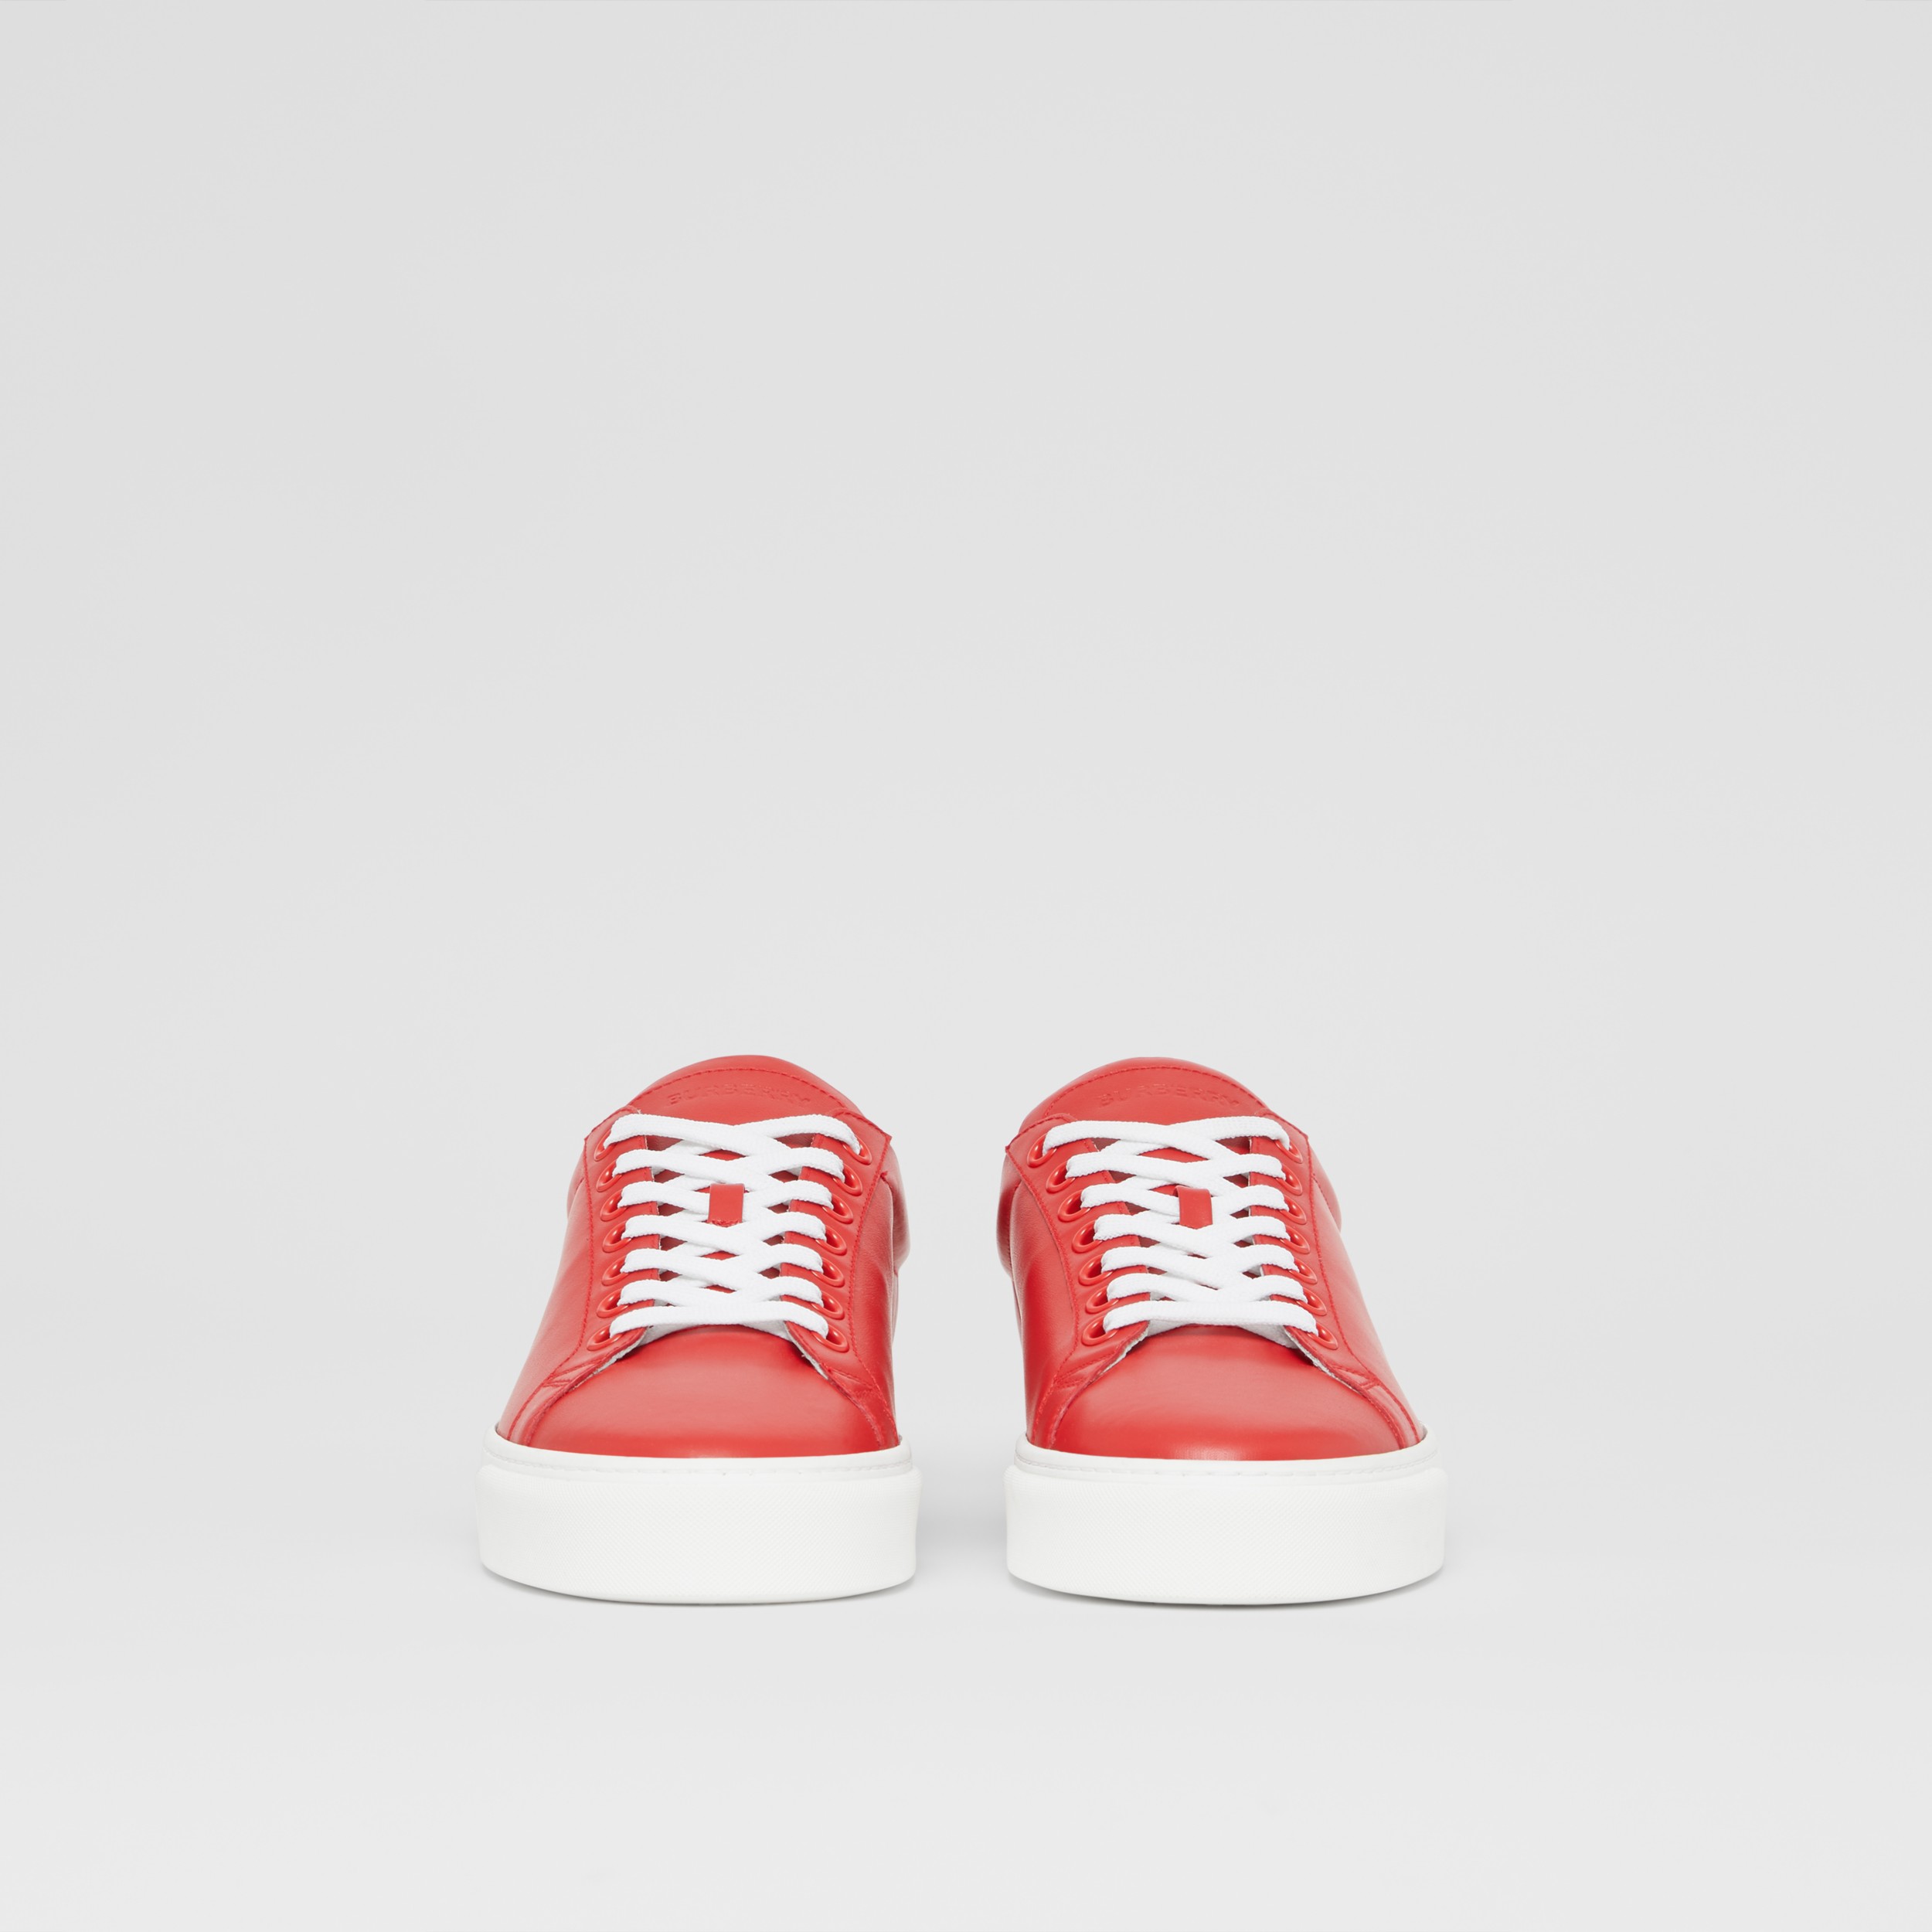 Bio-based Sole Leather Sneakers in Bright Red - Men | Burberry United ...